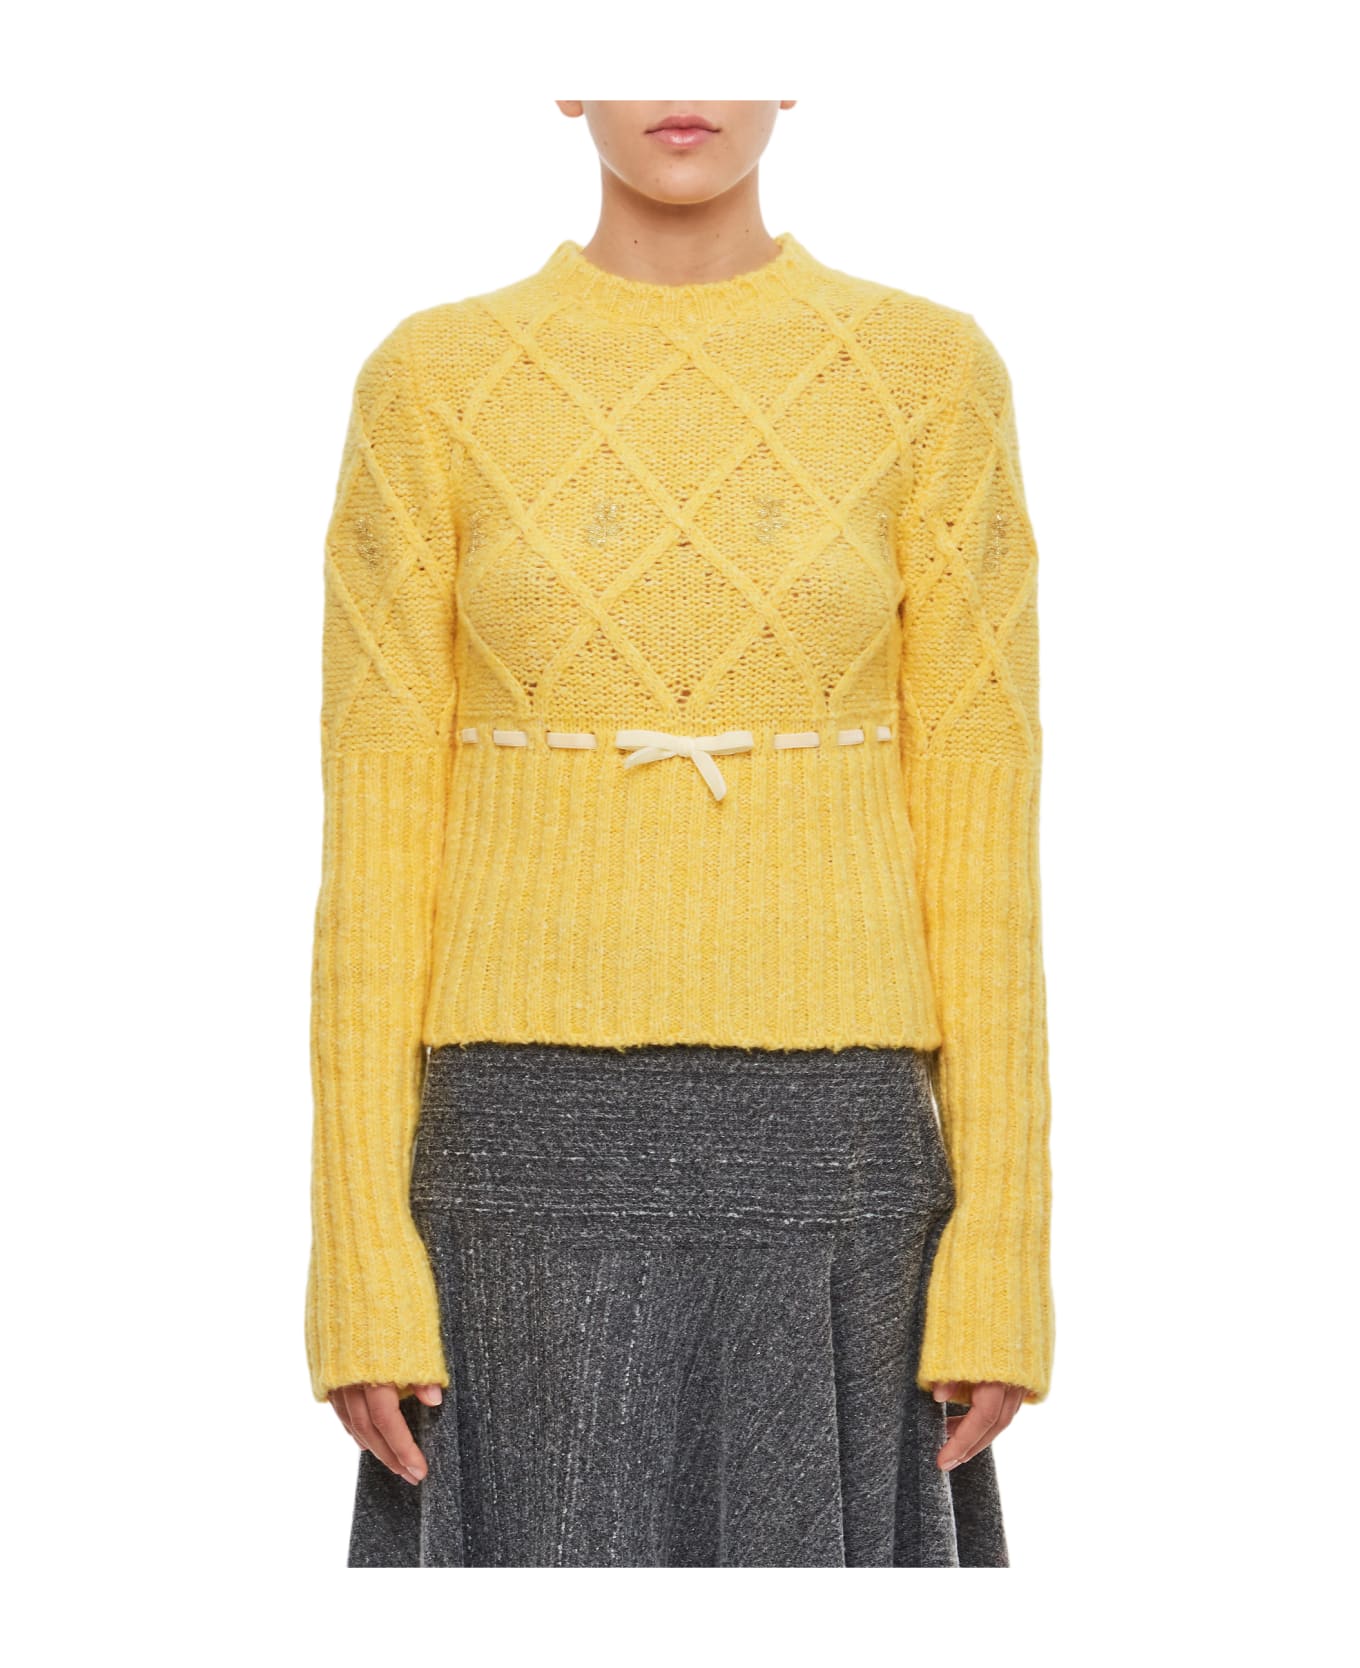 Cormio Oma Embroidered Wool Blend Sweater - Yellow